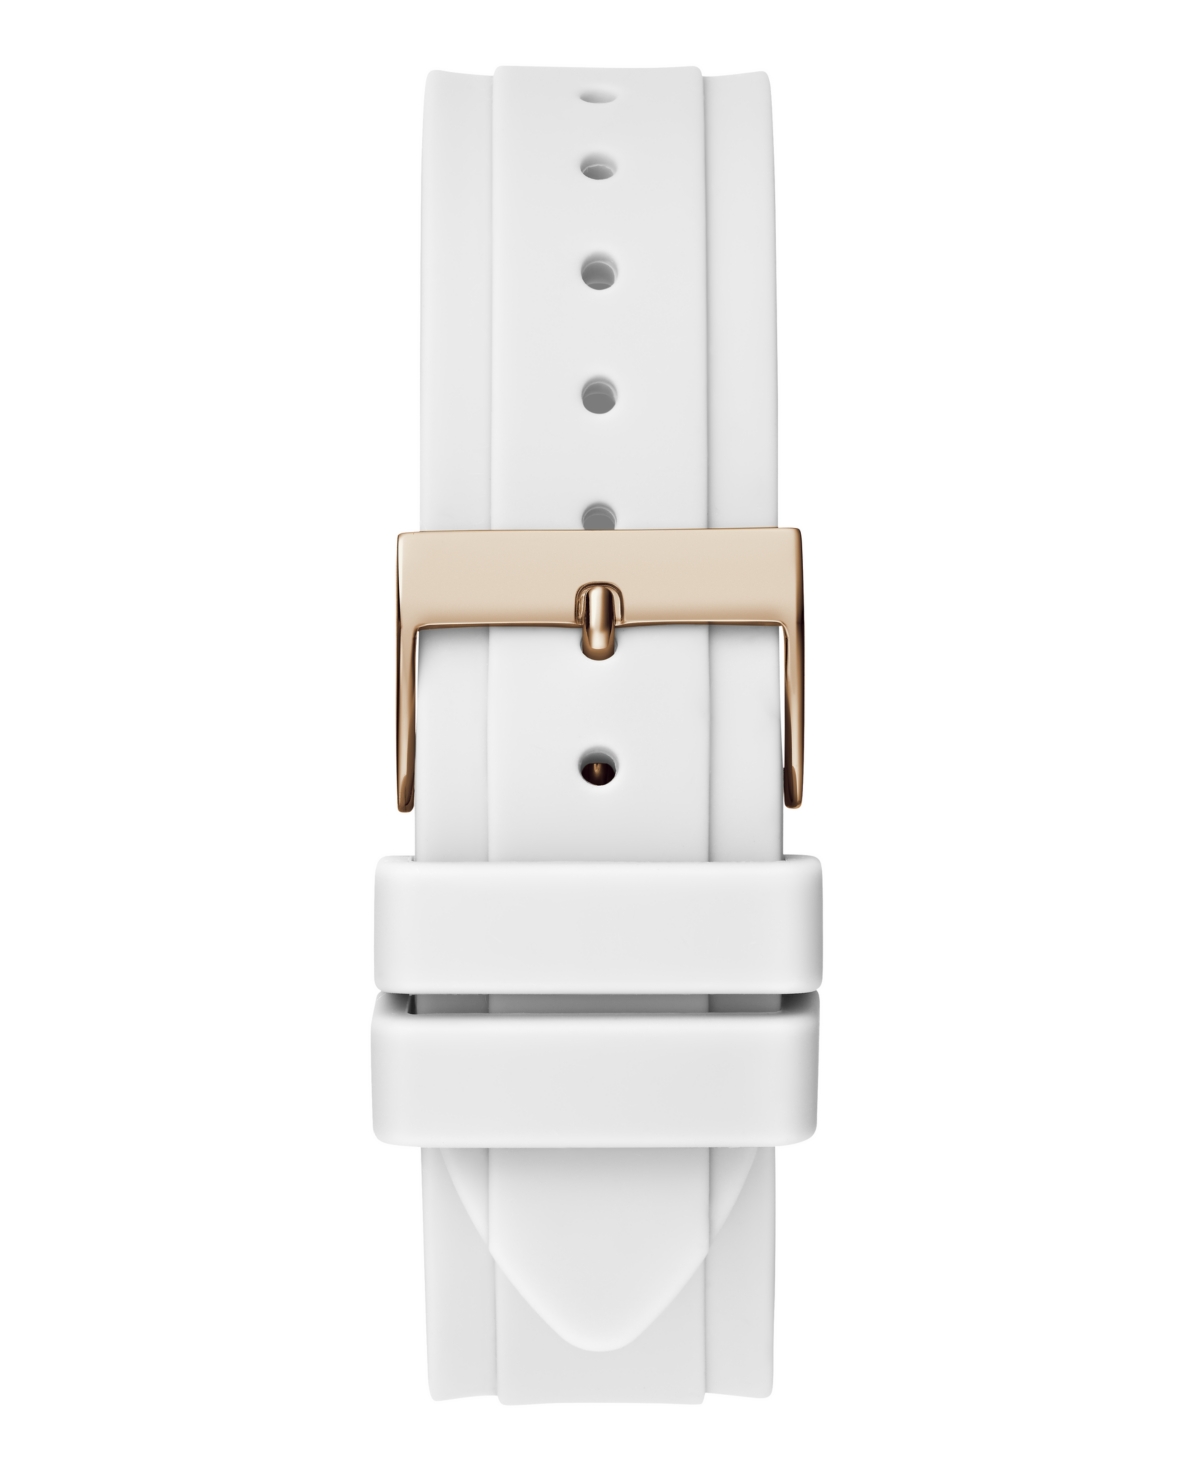 Shop Guess Women's Analog White Silicone Watch 39mm